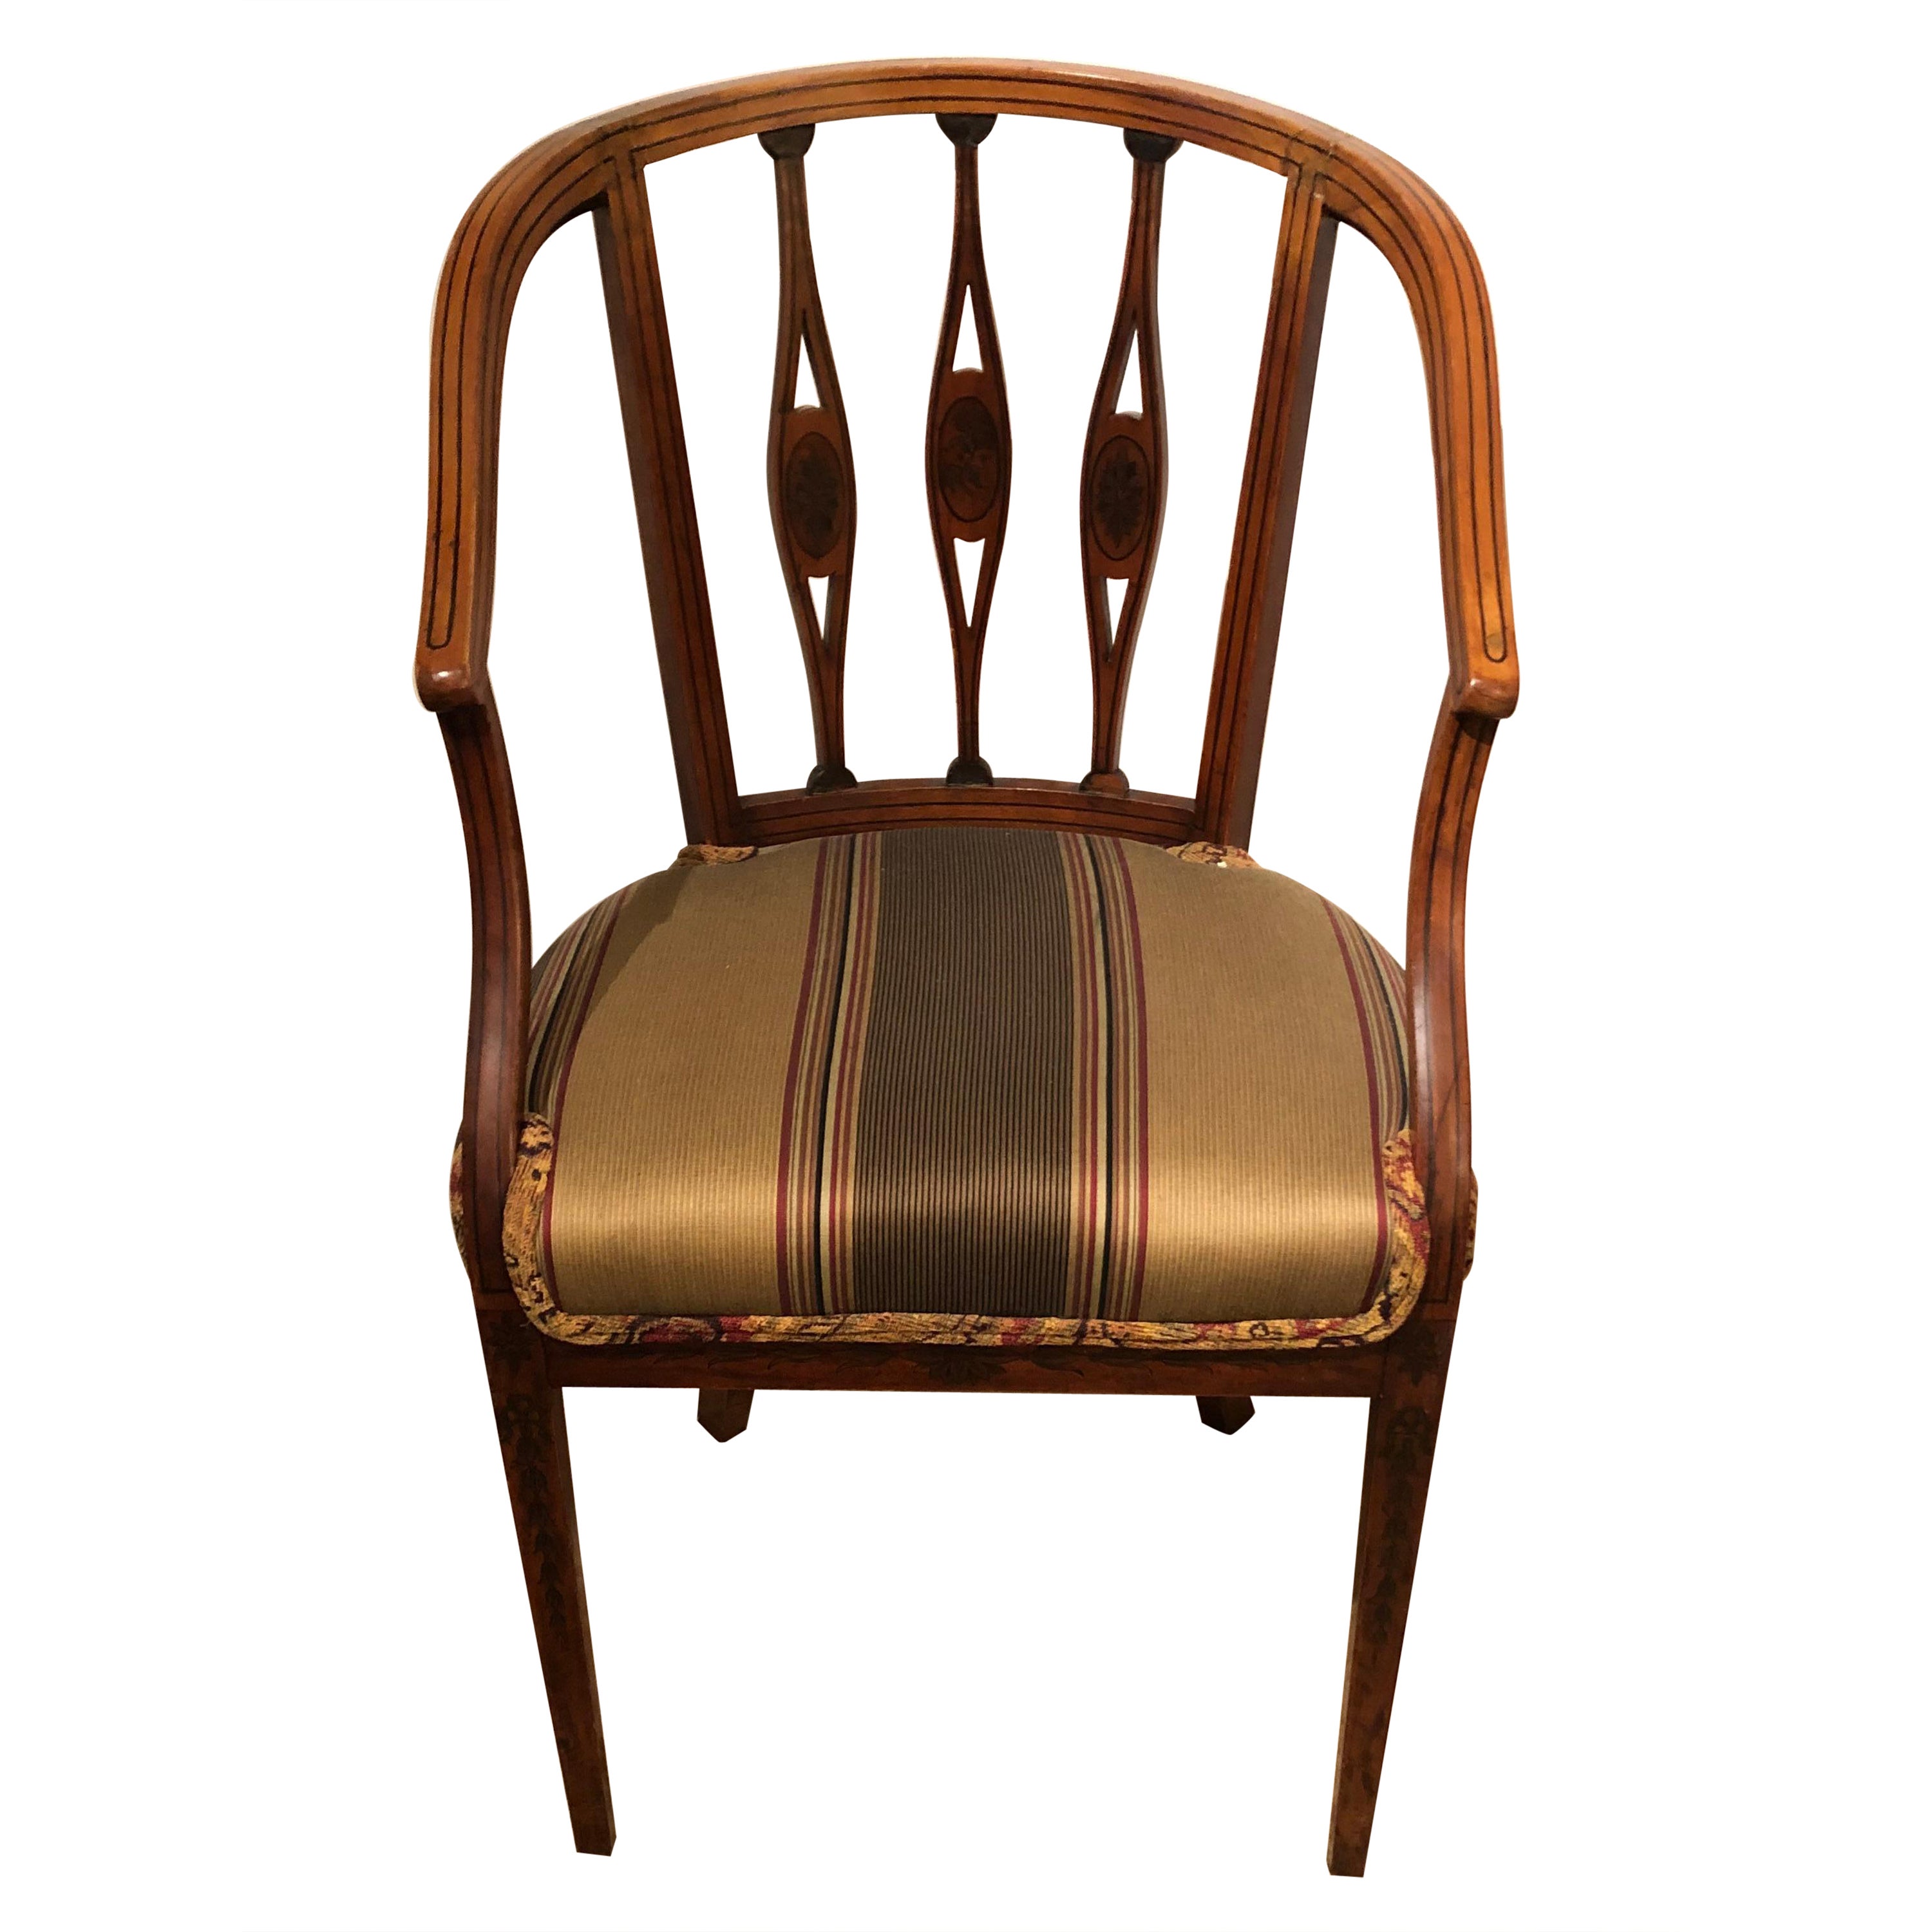 Lovely Curved French Fruitwood Inlaid Salon or Desk Chair For Sale